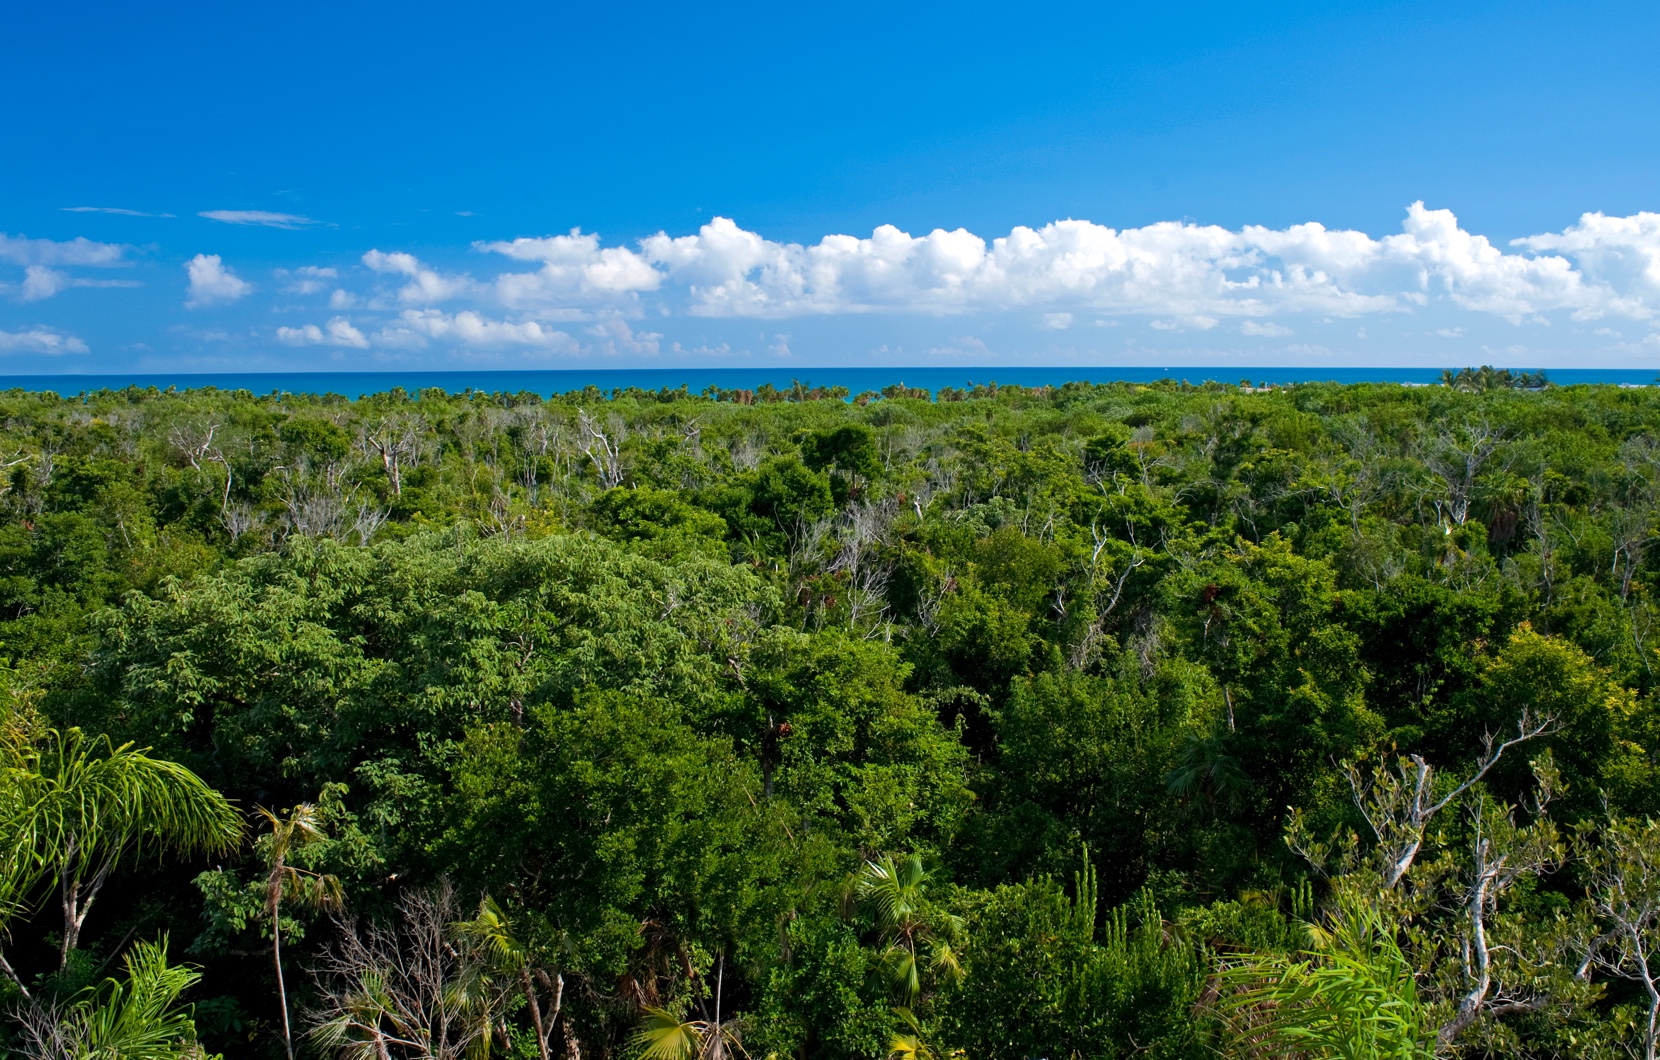 Canopy view of the Mayan jungle and Caribbean waters.